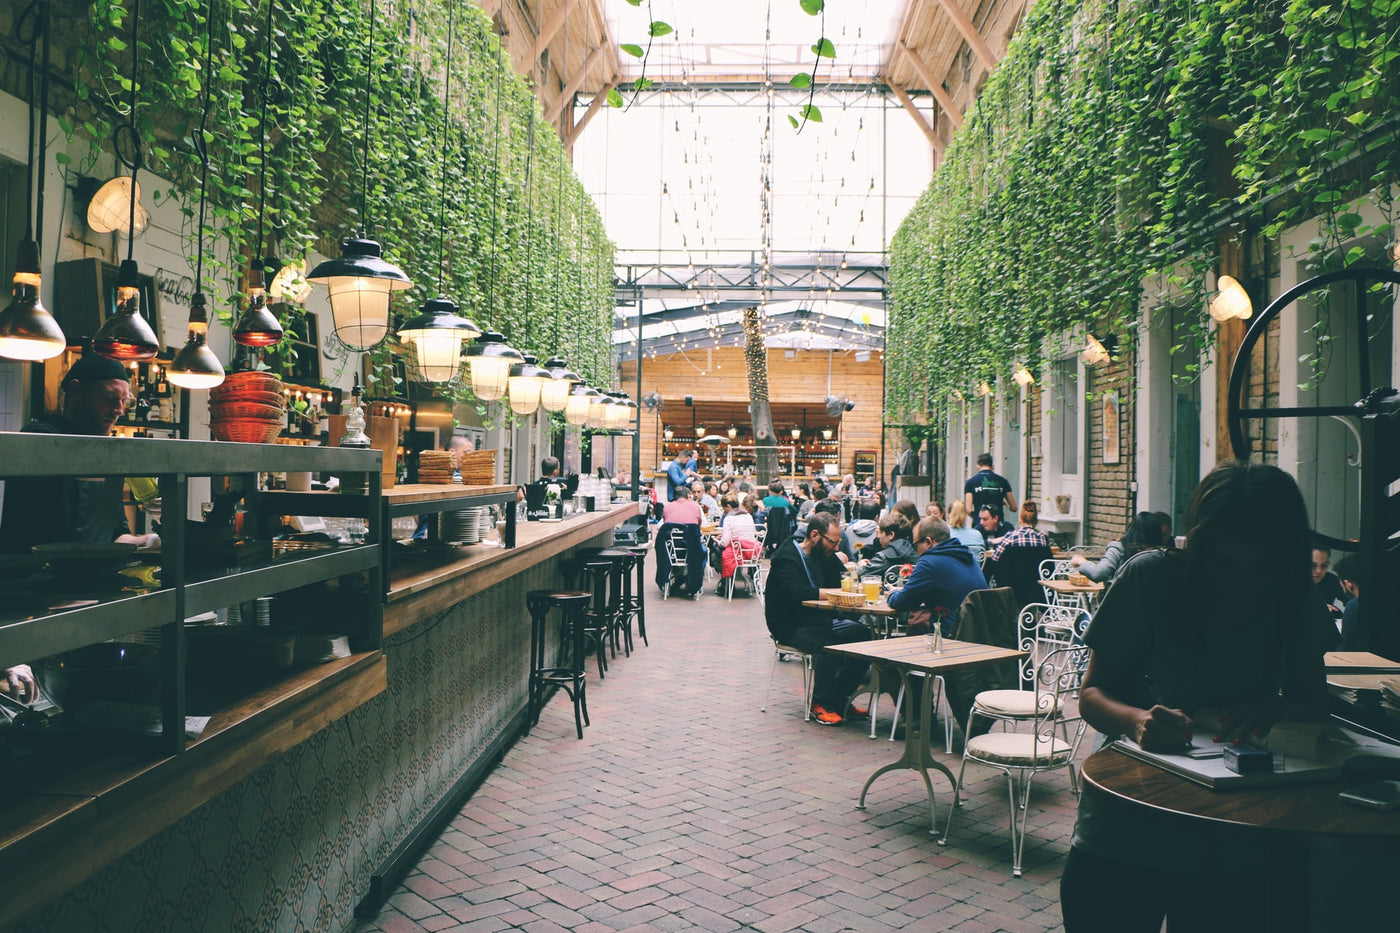 3 of our favourite bars and restaurants that are plant heaven